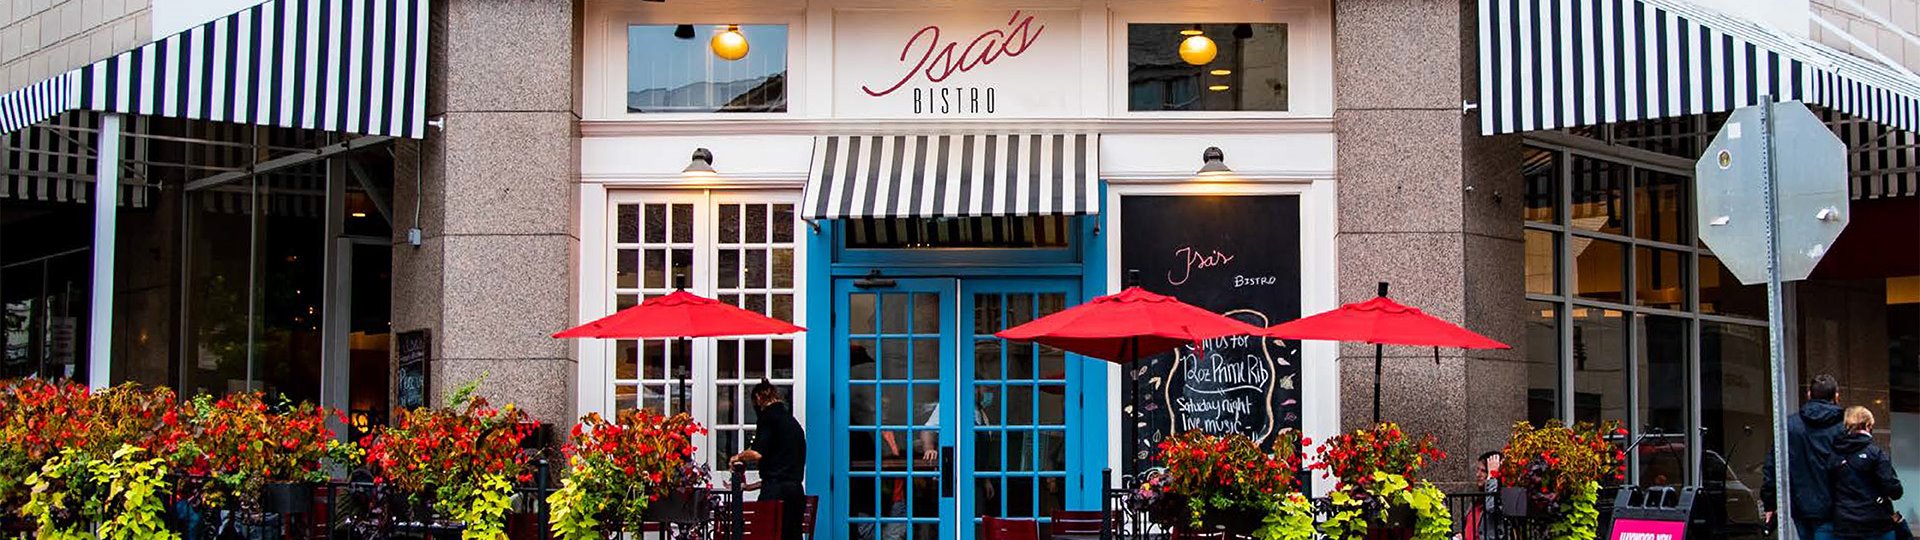 About Isa's French Bistro Restaurant, Asheville